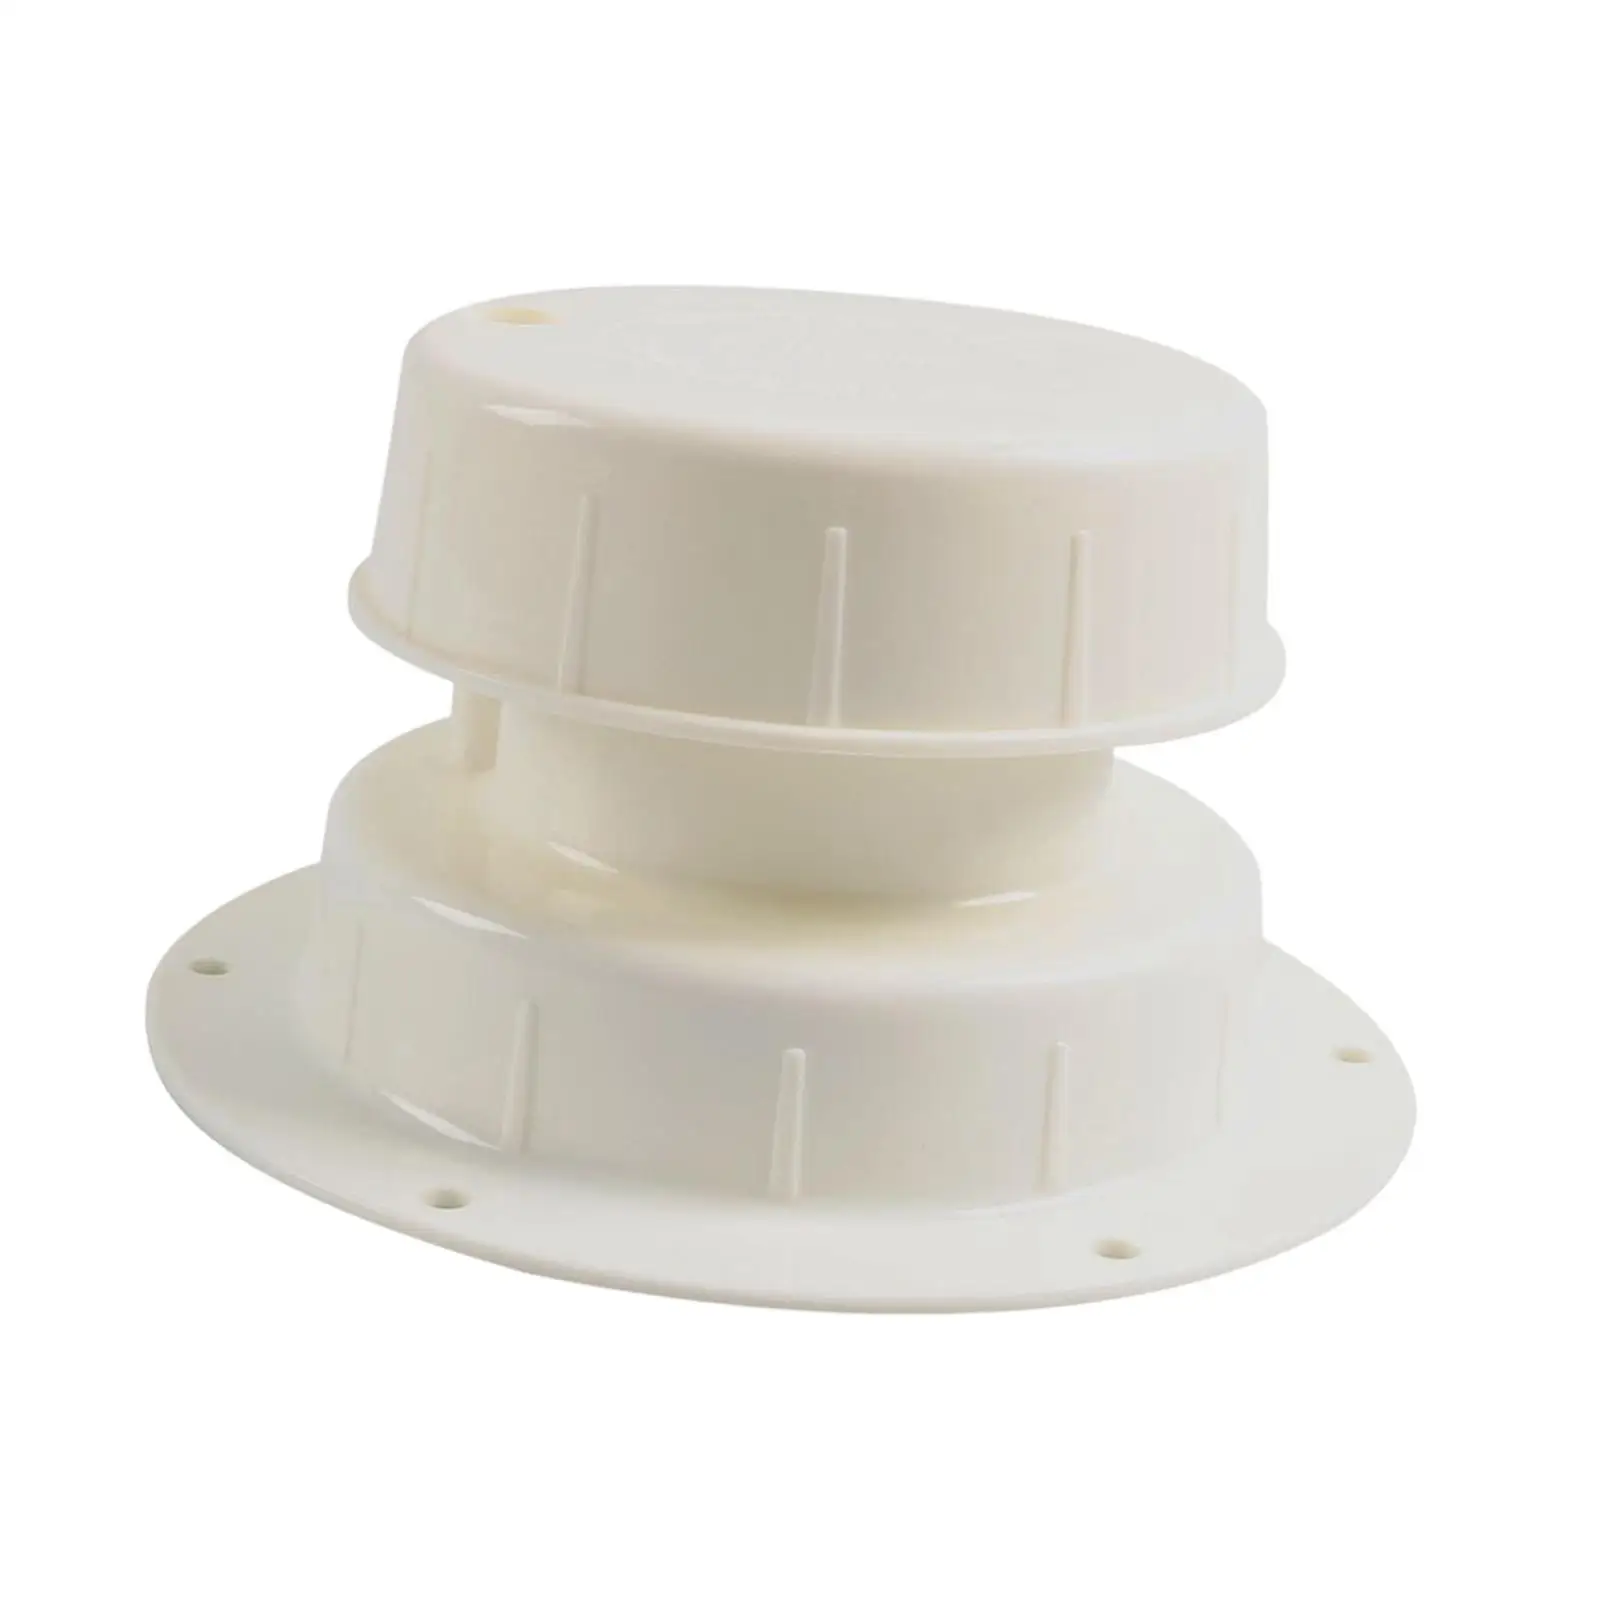 RV Camper Trailer Plumbing Roof Vent Cap RV Roof Vent Cover Sewer Vent Cover for 1 to 2 3/8 inch Pipe RV Trailer Camper